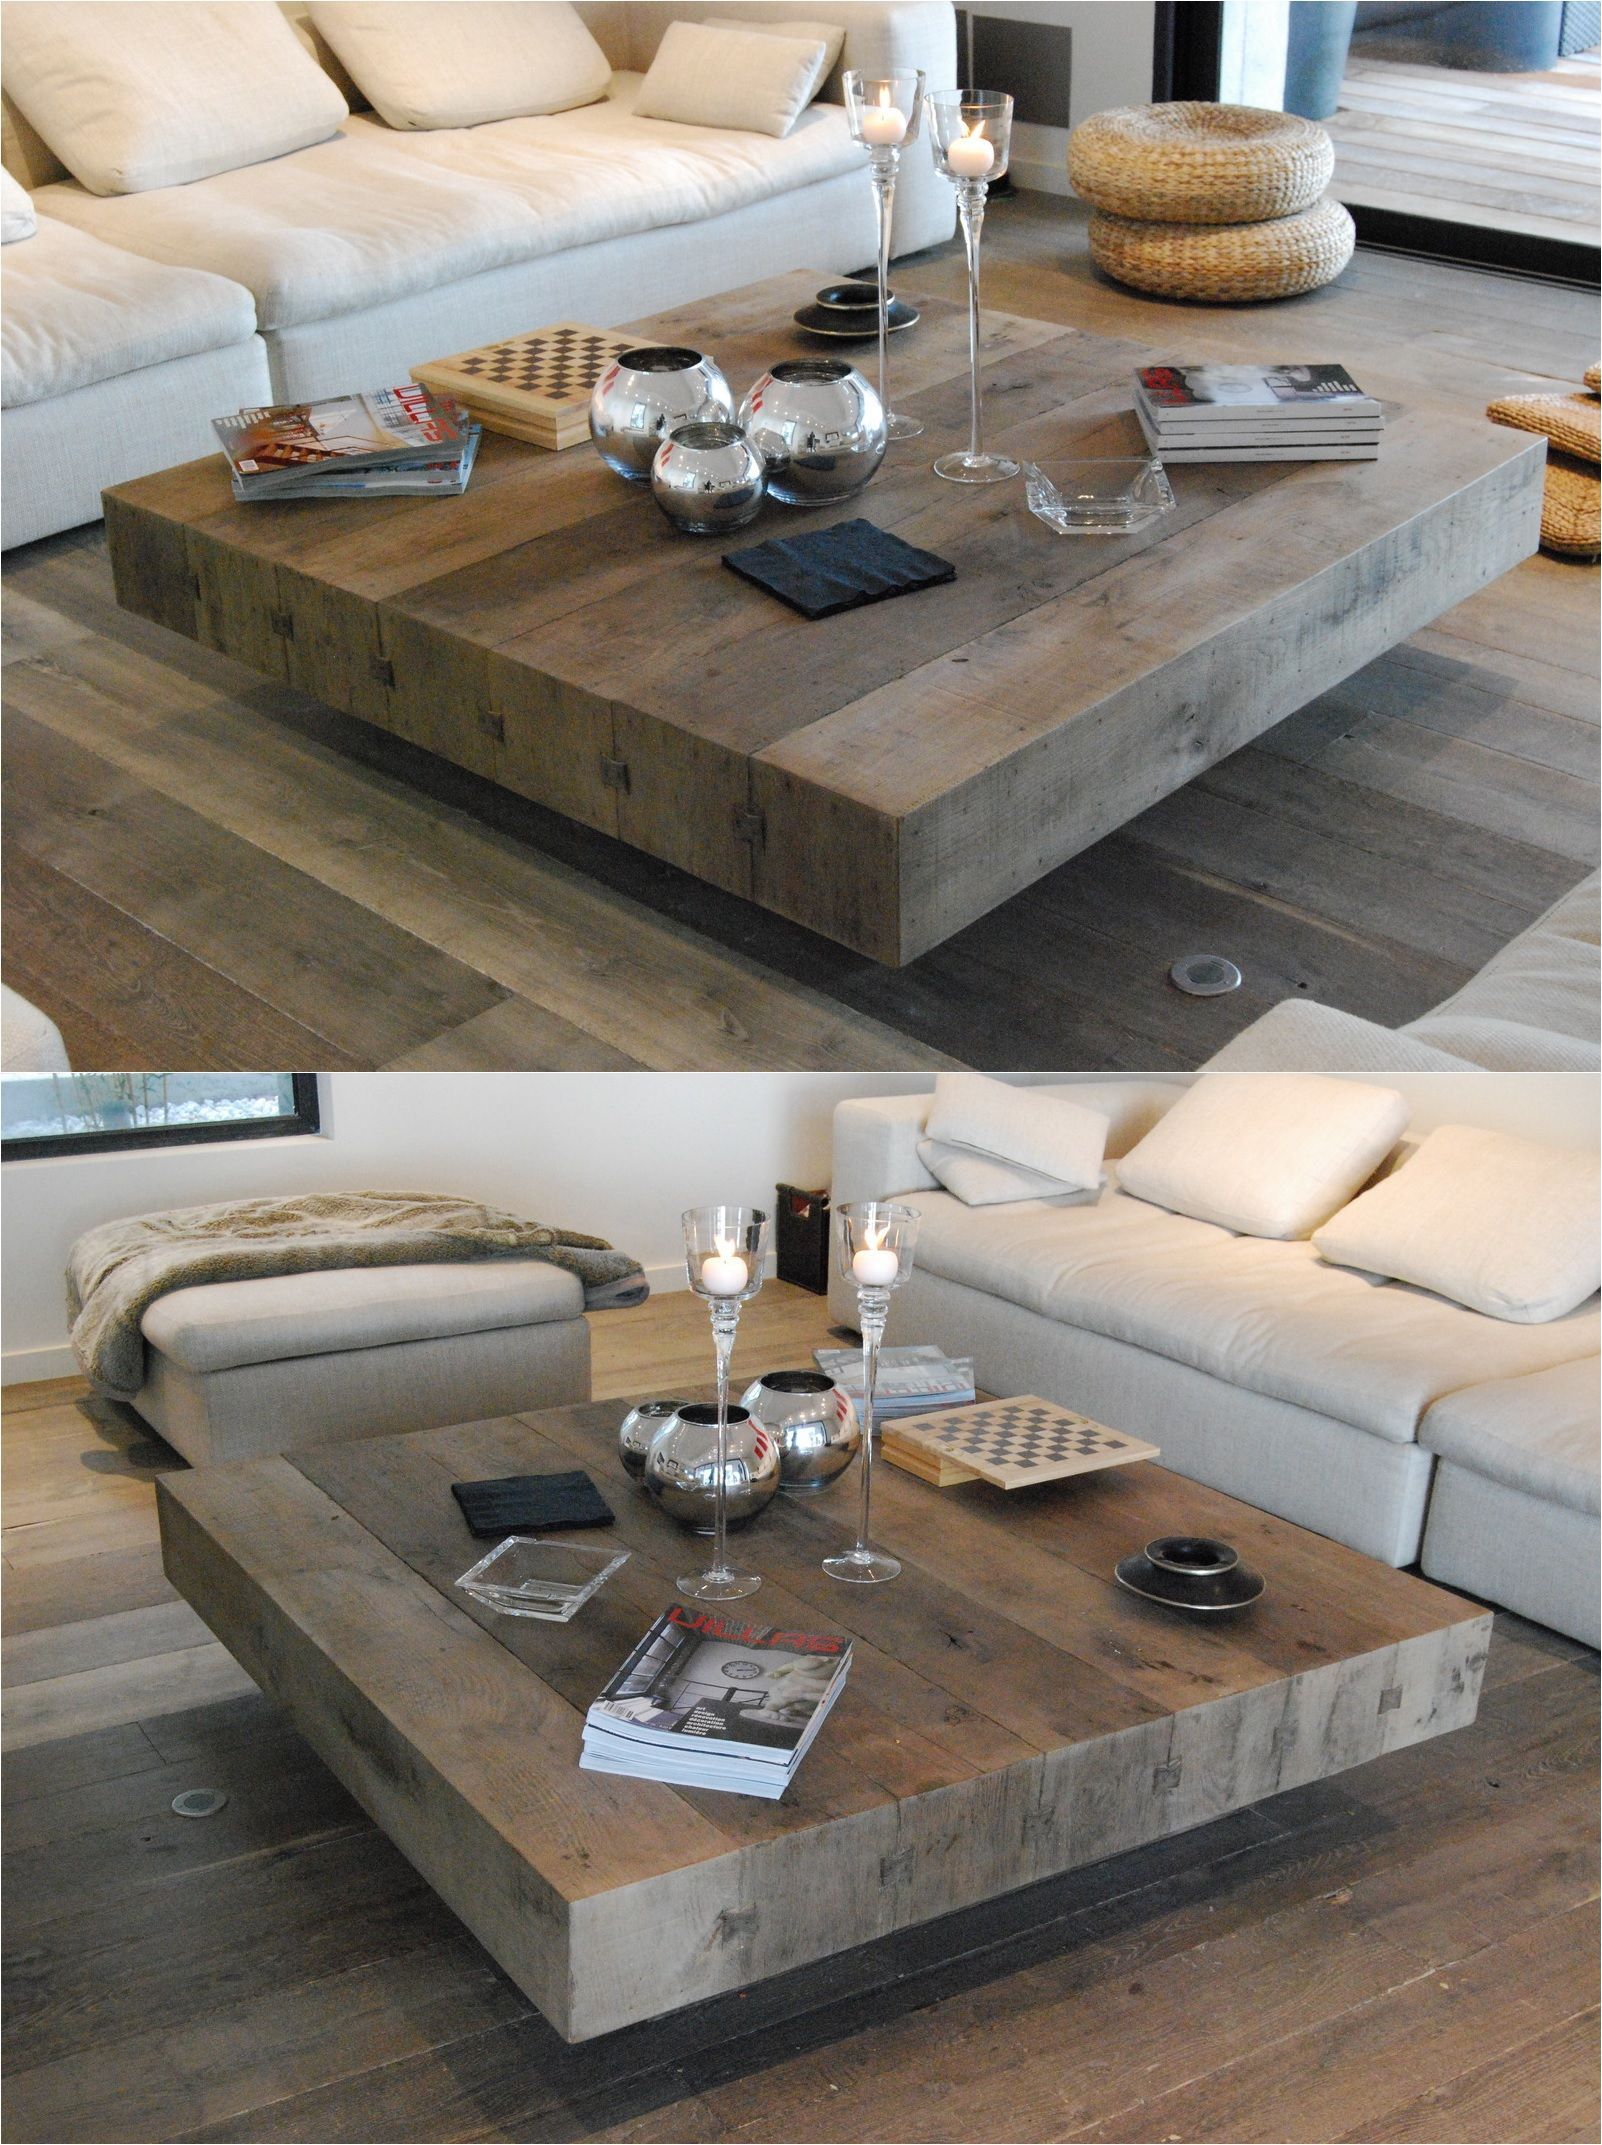 15 Large Square Coffee Tables For Sale Inspiration With Regard To 1 Shelf Square Coffee Tables (View 2 of 15)